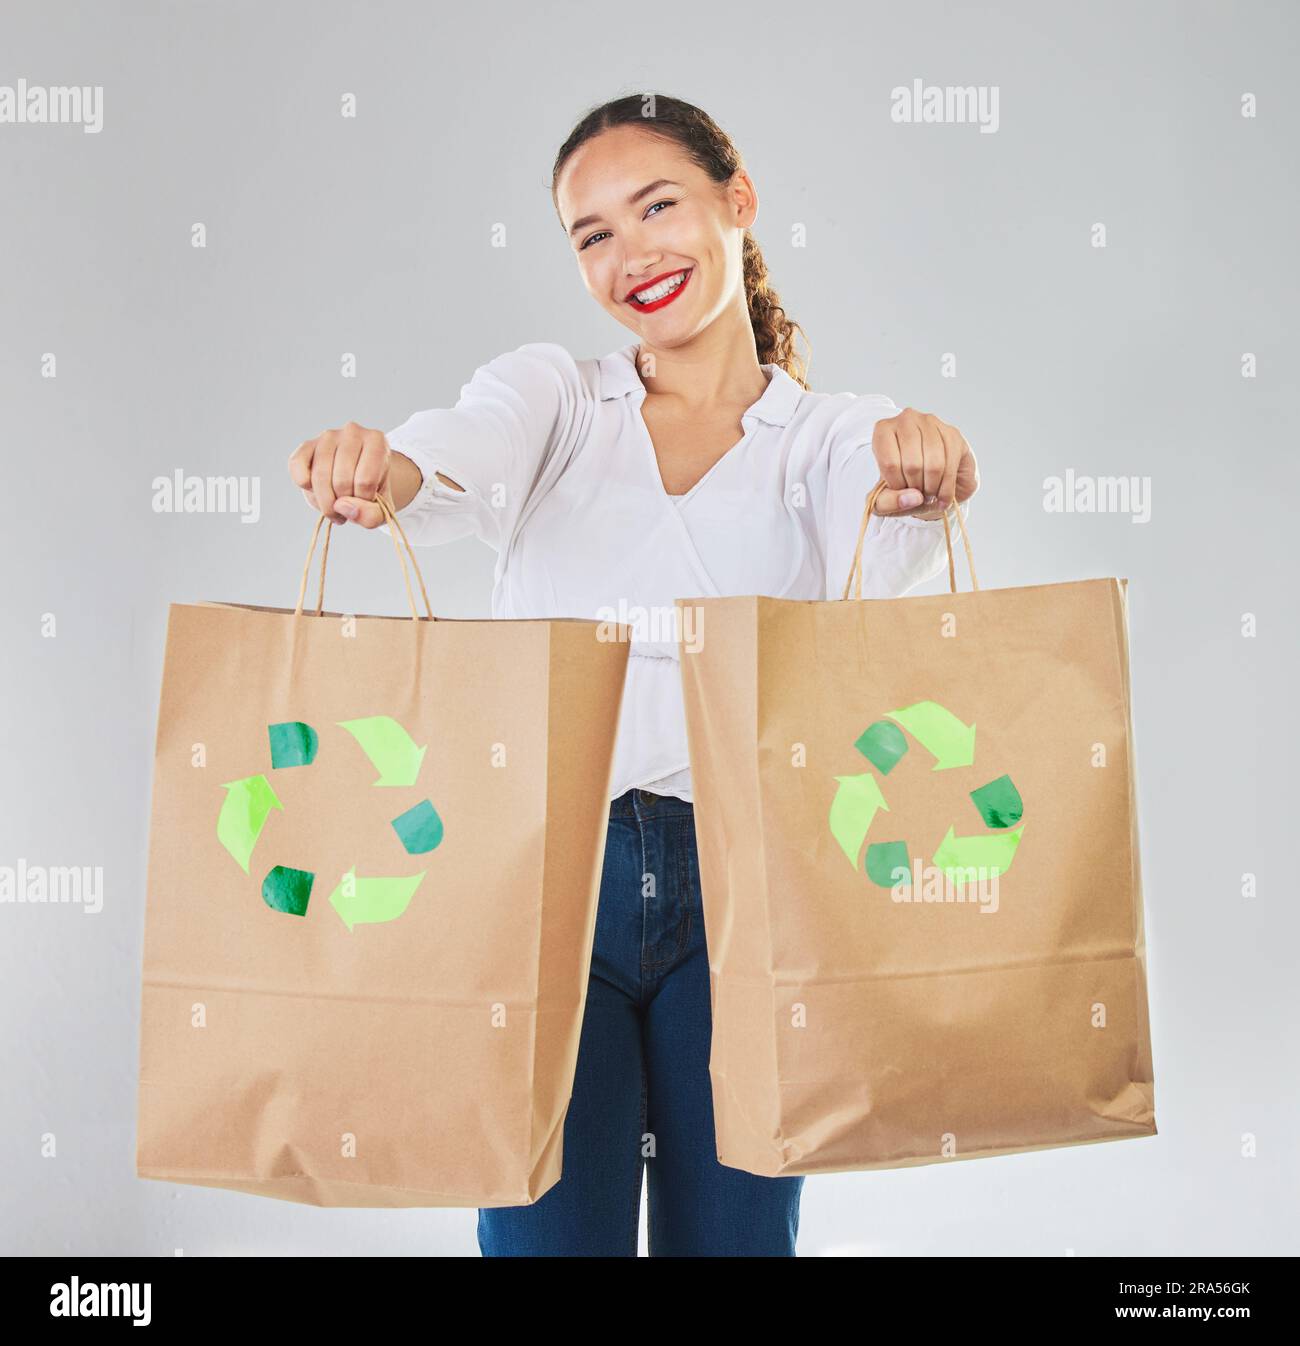 Recycle, environment and woman with bag, sustainability with shopping in portrait and logo on white background. Environmental, retail and eco friendly Stock Photo